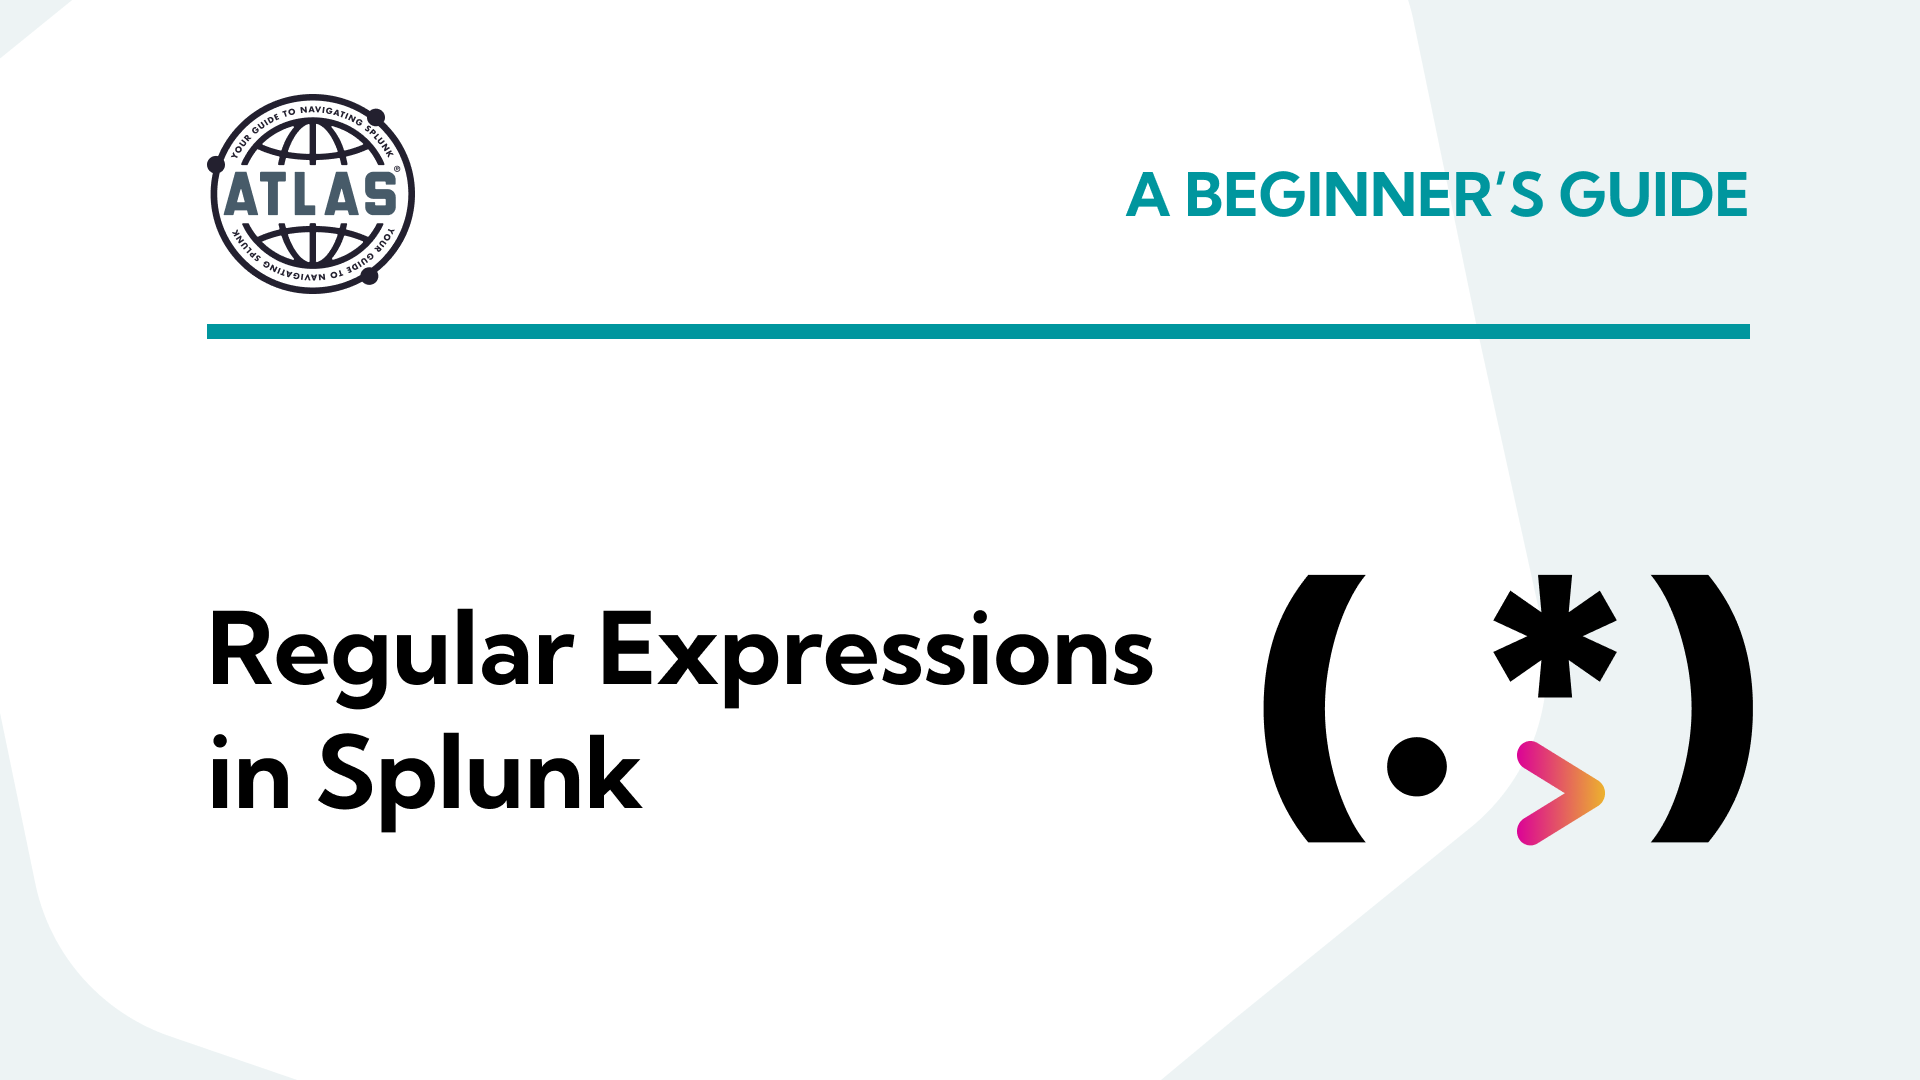 A Beginner's Guide to Regular Expressions in Splunk